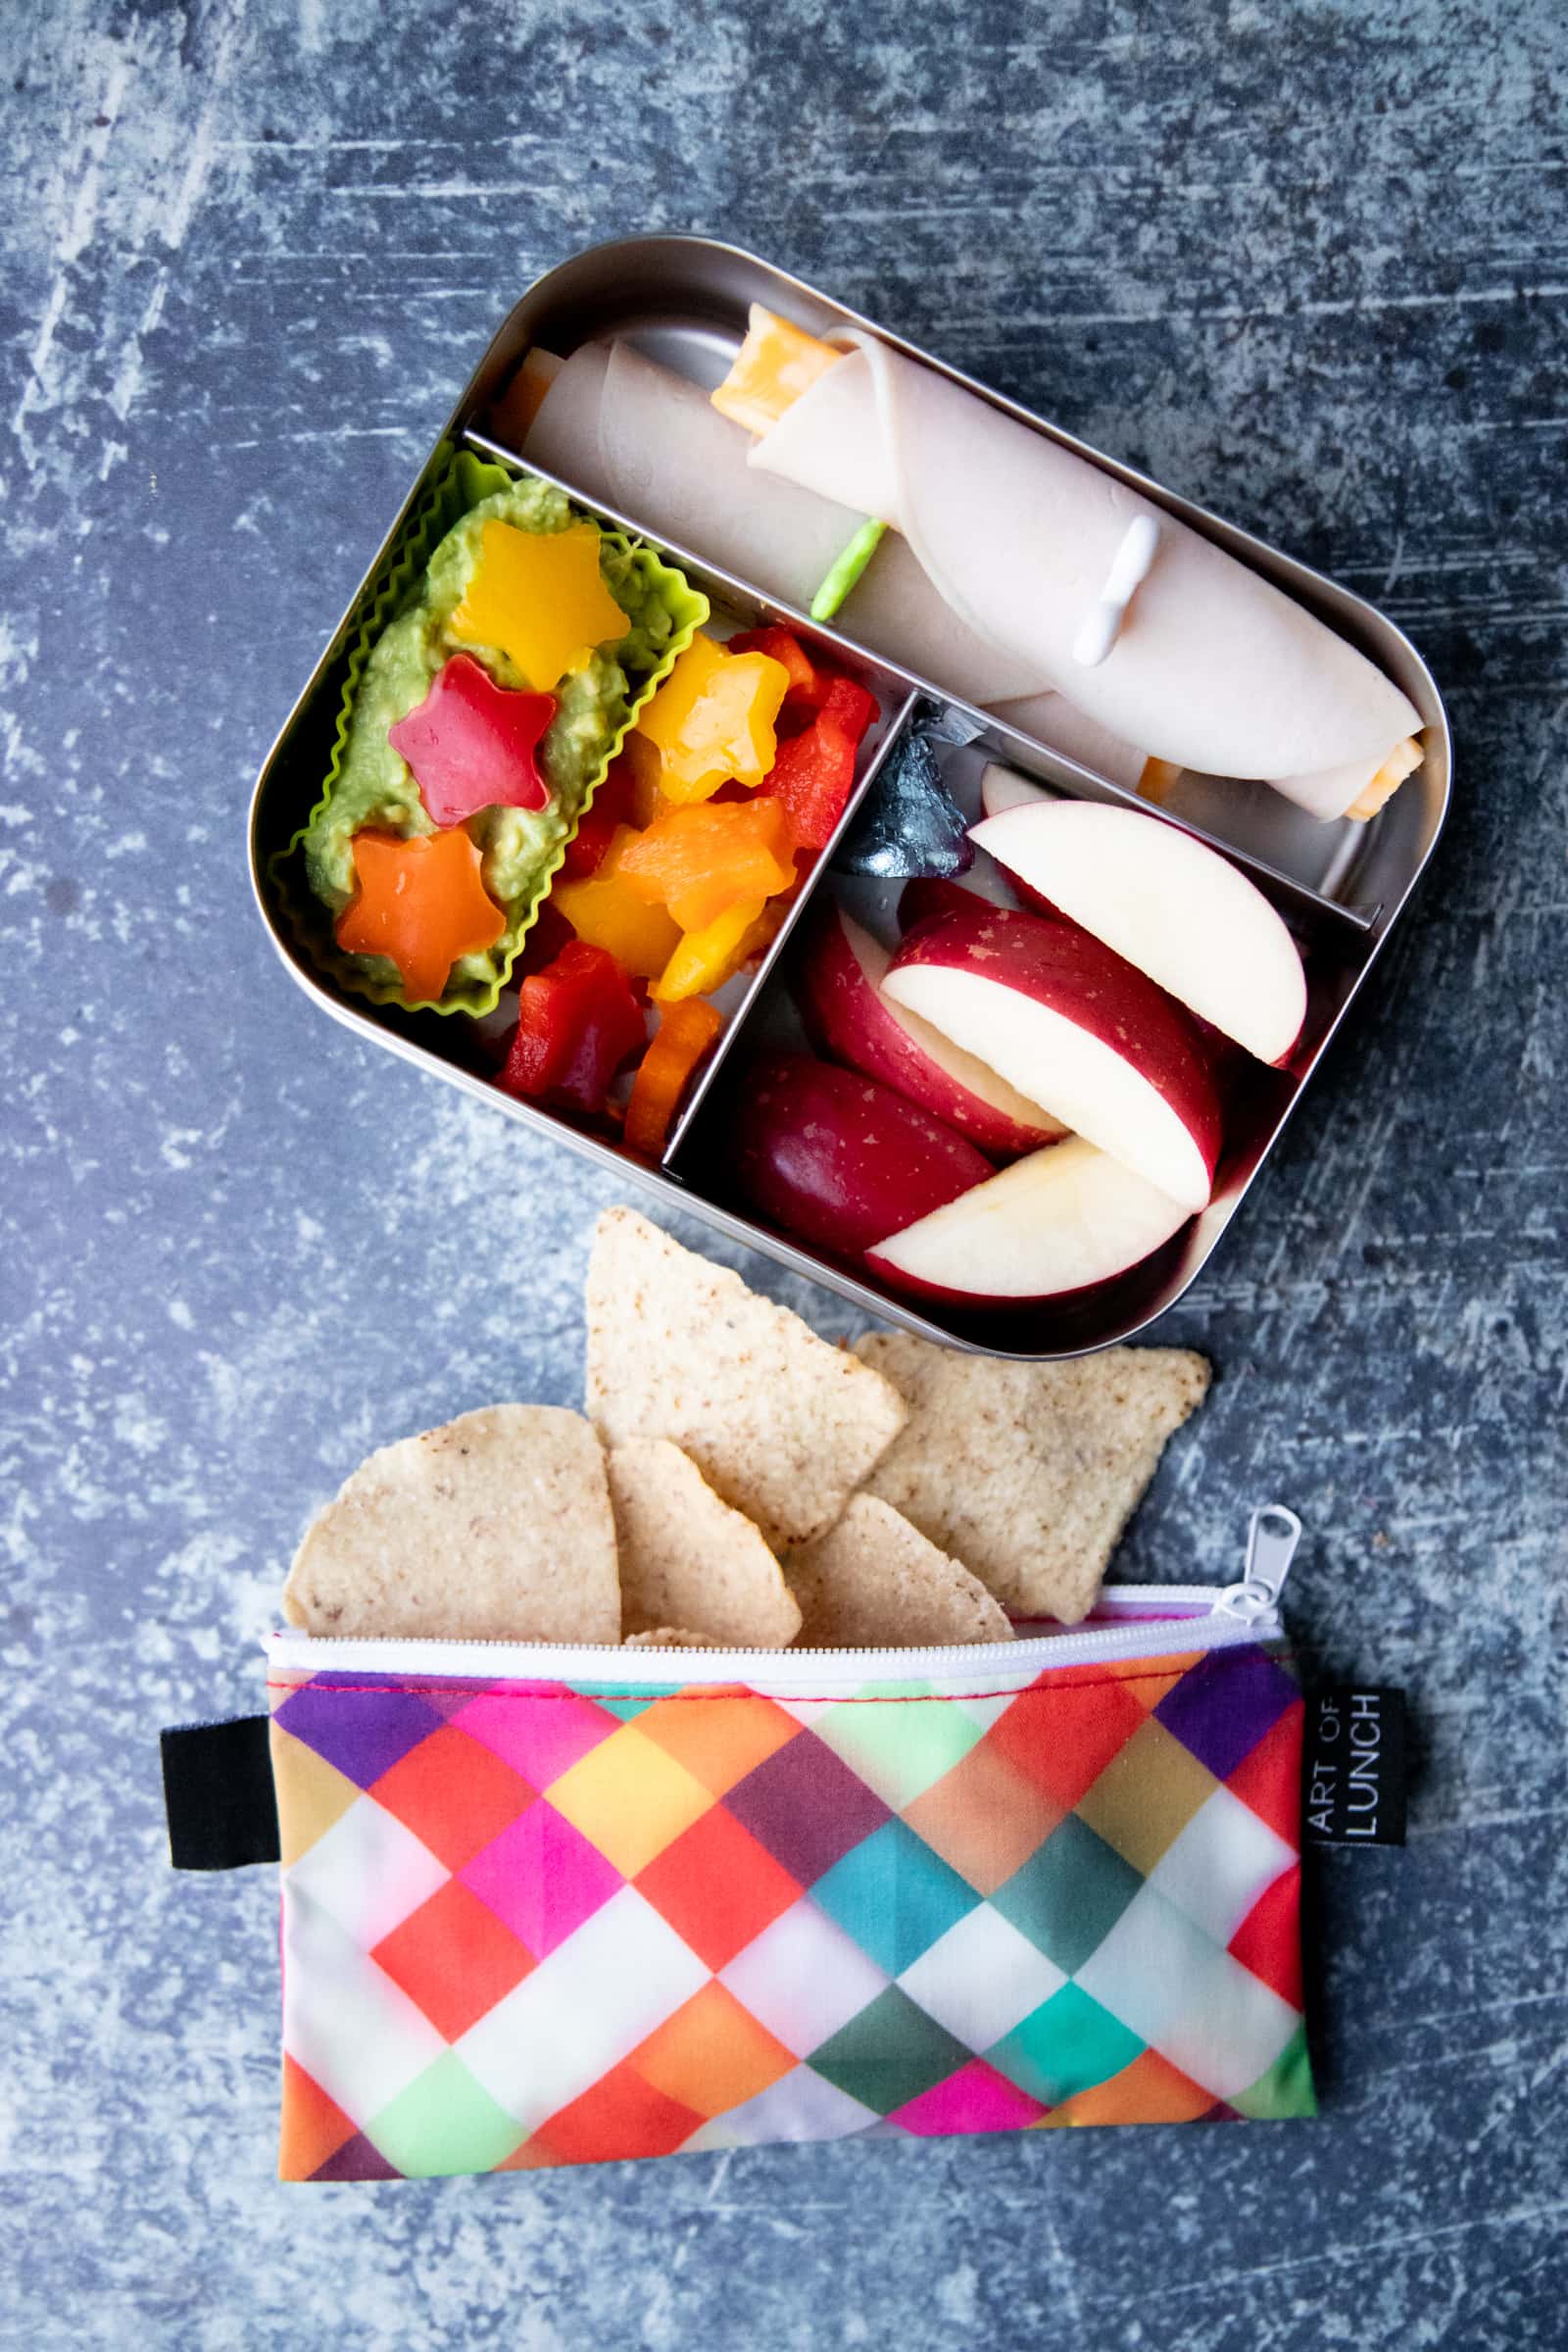 Packed lunch of apple slices, bell pepper stars, guacamole, turkey and cheese roll-ups, and a bag of tortilla chips.